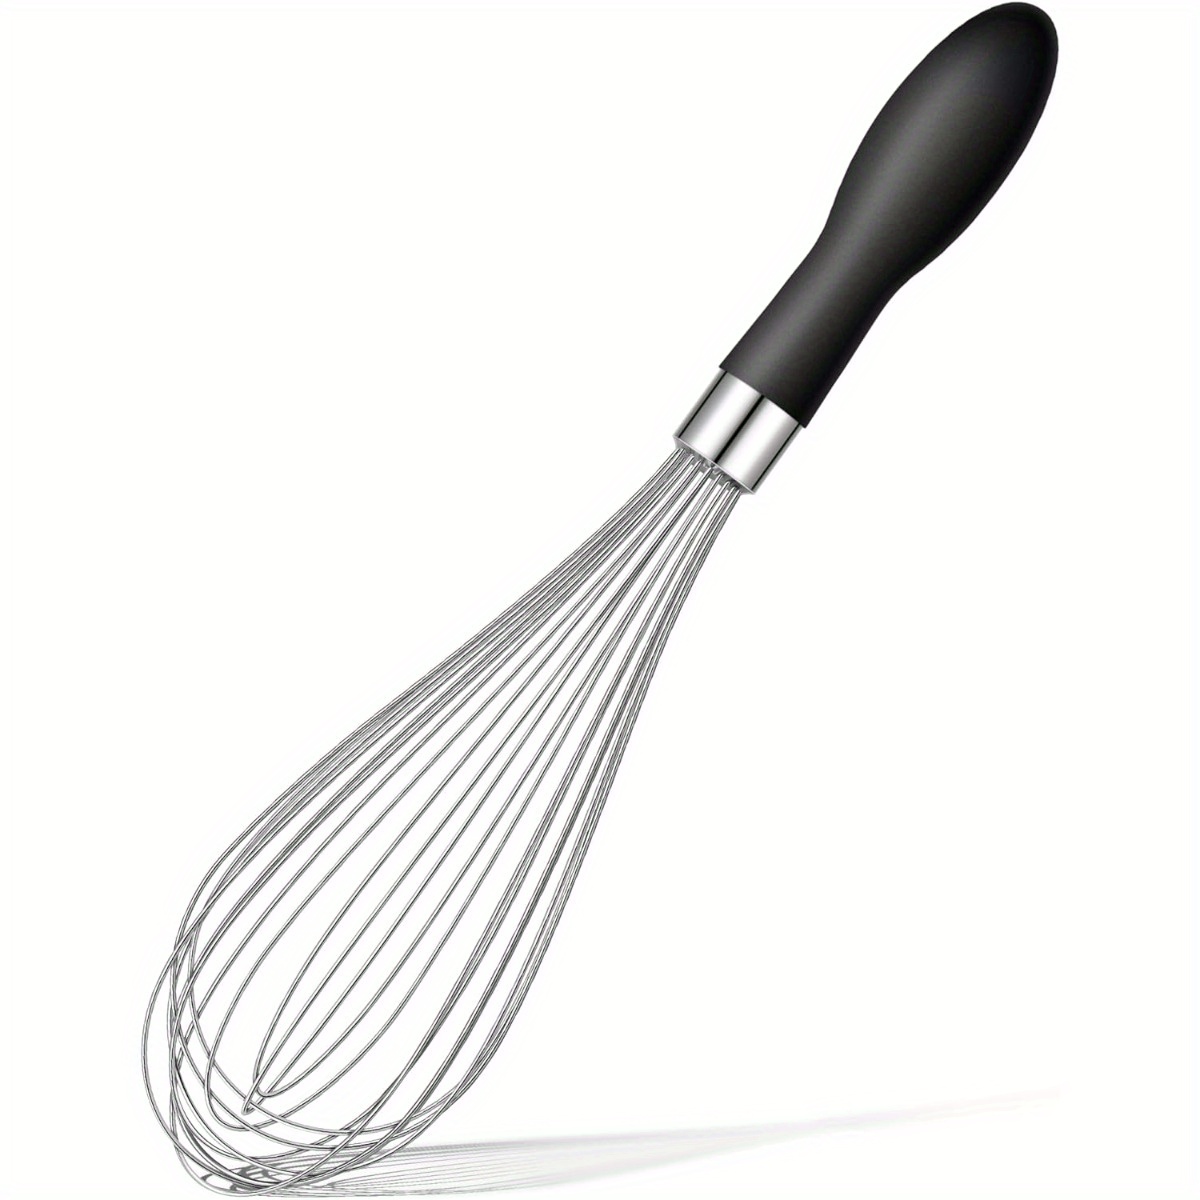 

1pc Stainless Steel Whisk With Soft Silicone Handle, Thick Durable Egg Whisker For Blending, Beating, Whisking, Stirring, Kitchen Gadget For Restaurants, Food Trucks